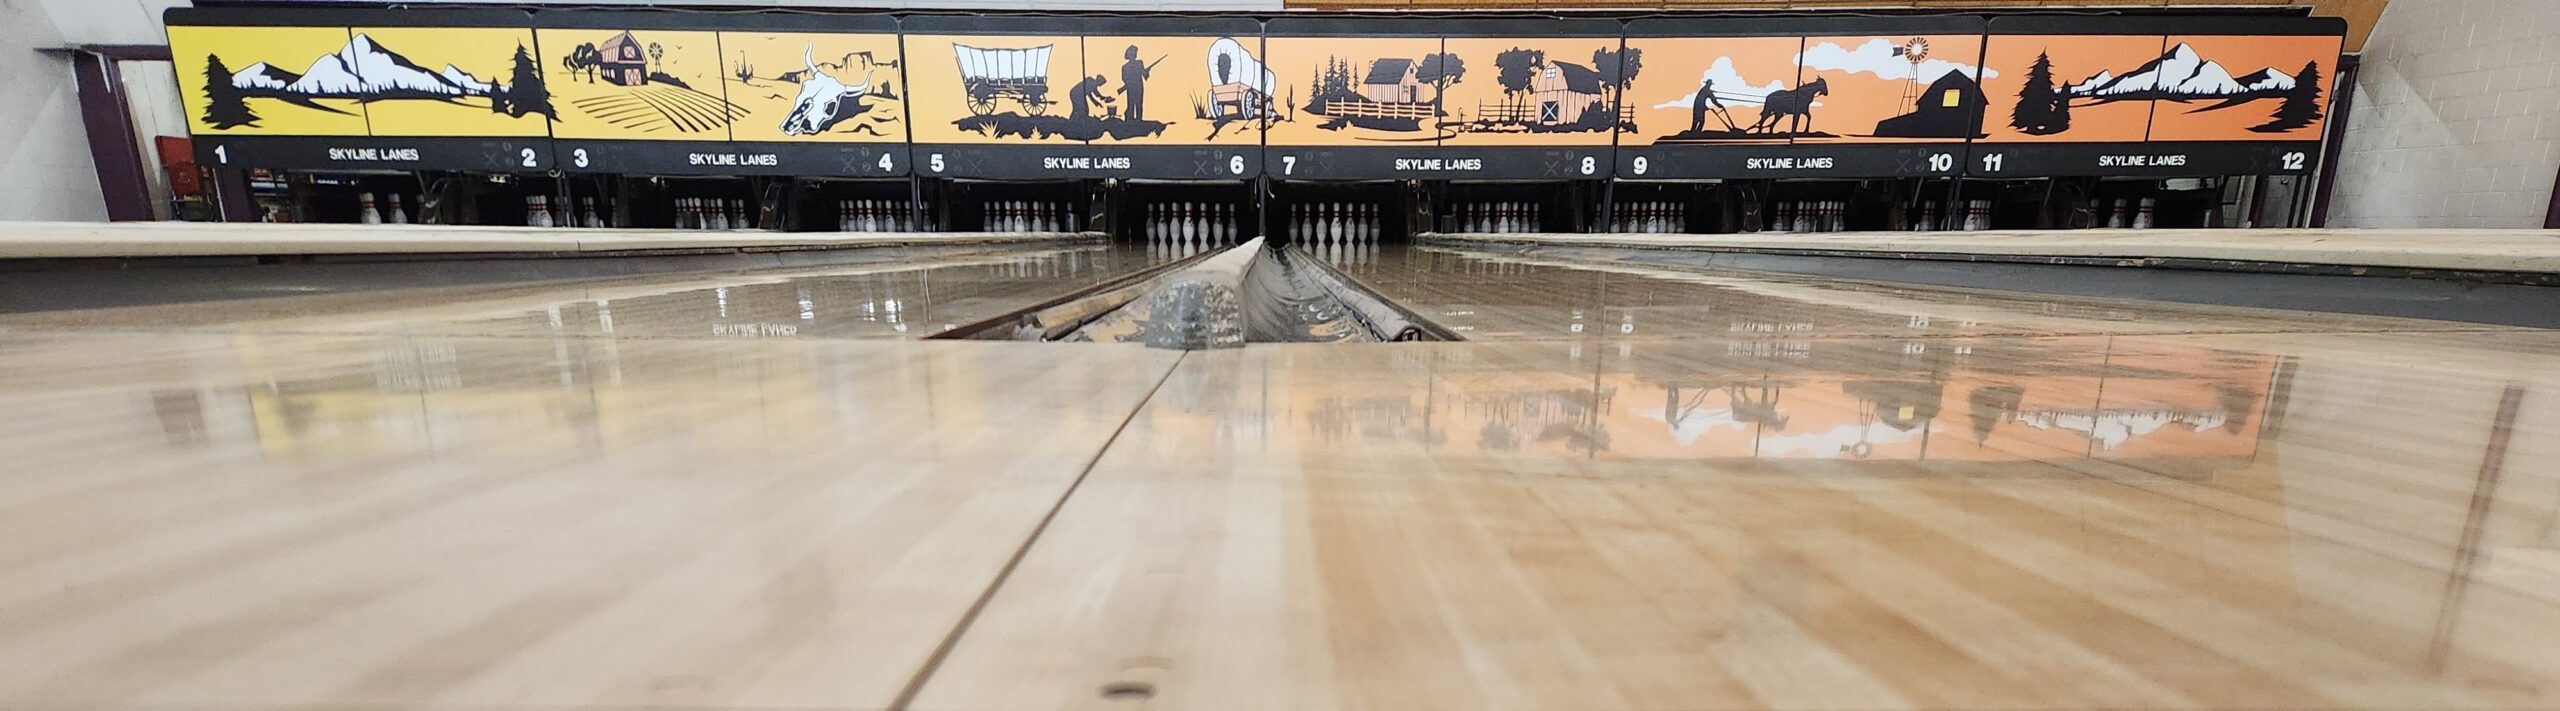 12 lane bowling alley with polished floors.